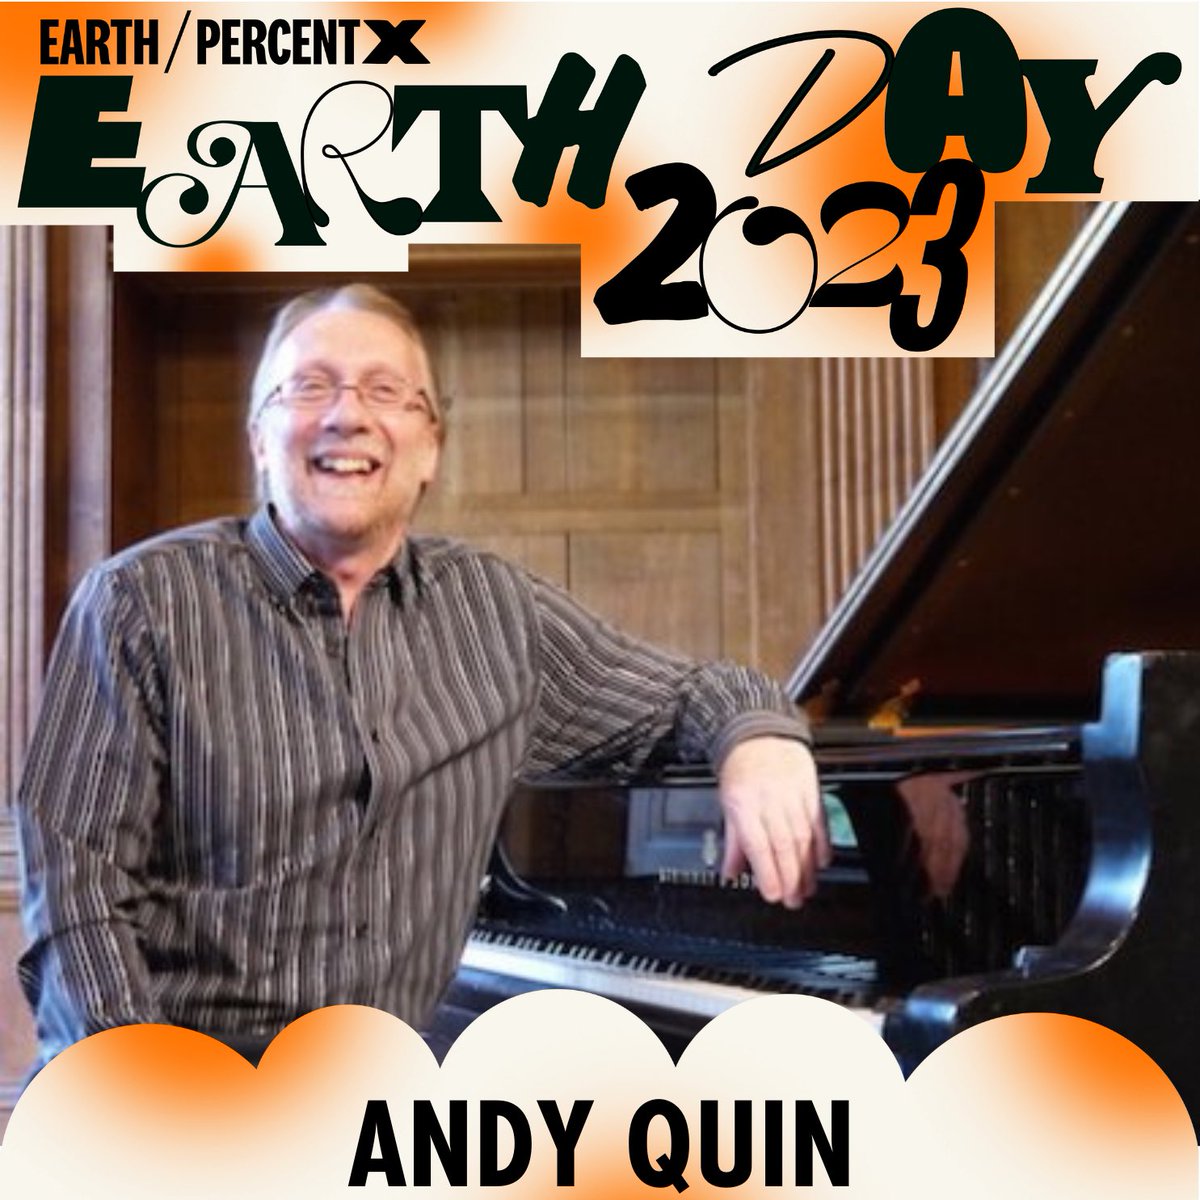 Join me and 60+ other passionate artists in supporting the fight against the climate crisis this Earth Day! Buy our exclusive tracks on Bandcamp to raise funds for @earthpercent's Grant Giving, supporting climate orgs worldwide.
#EarthPercentEarthDay